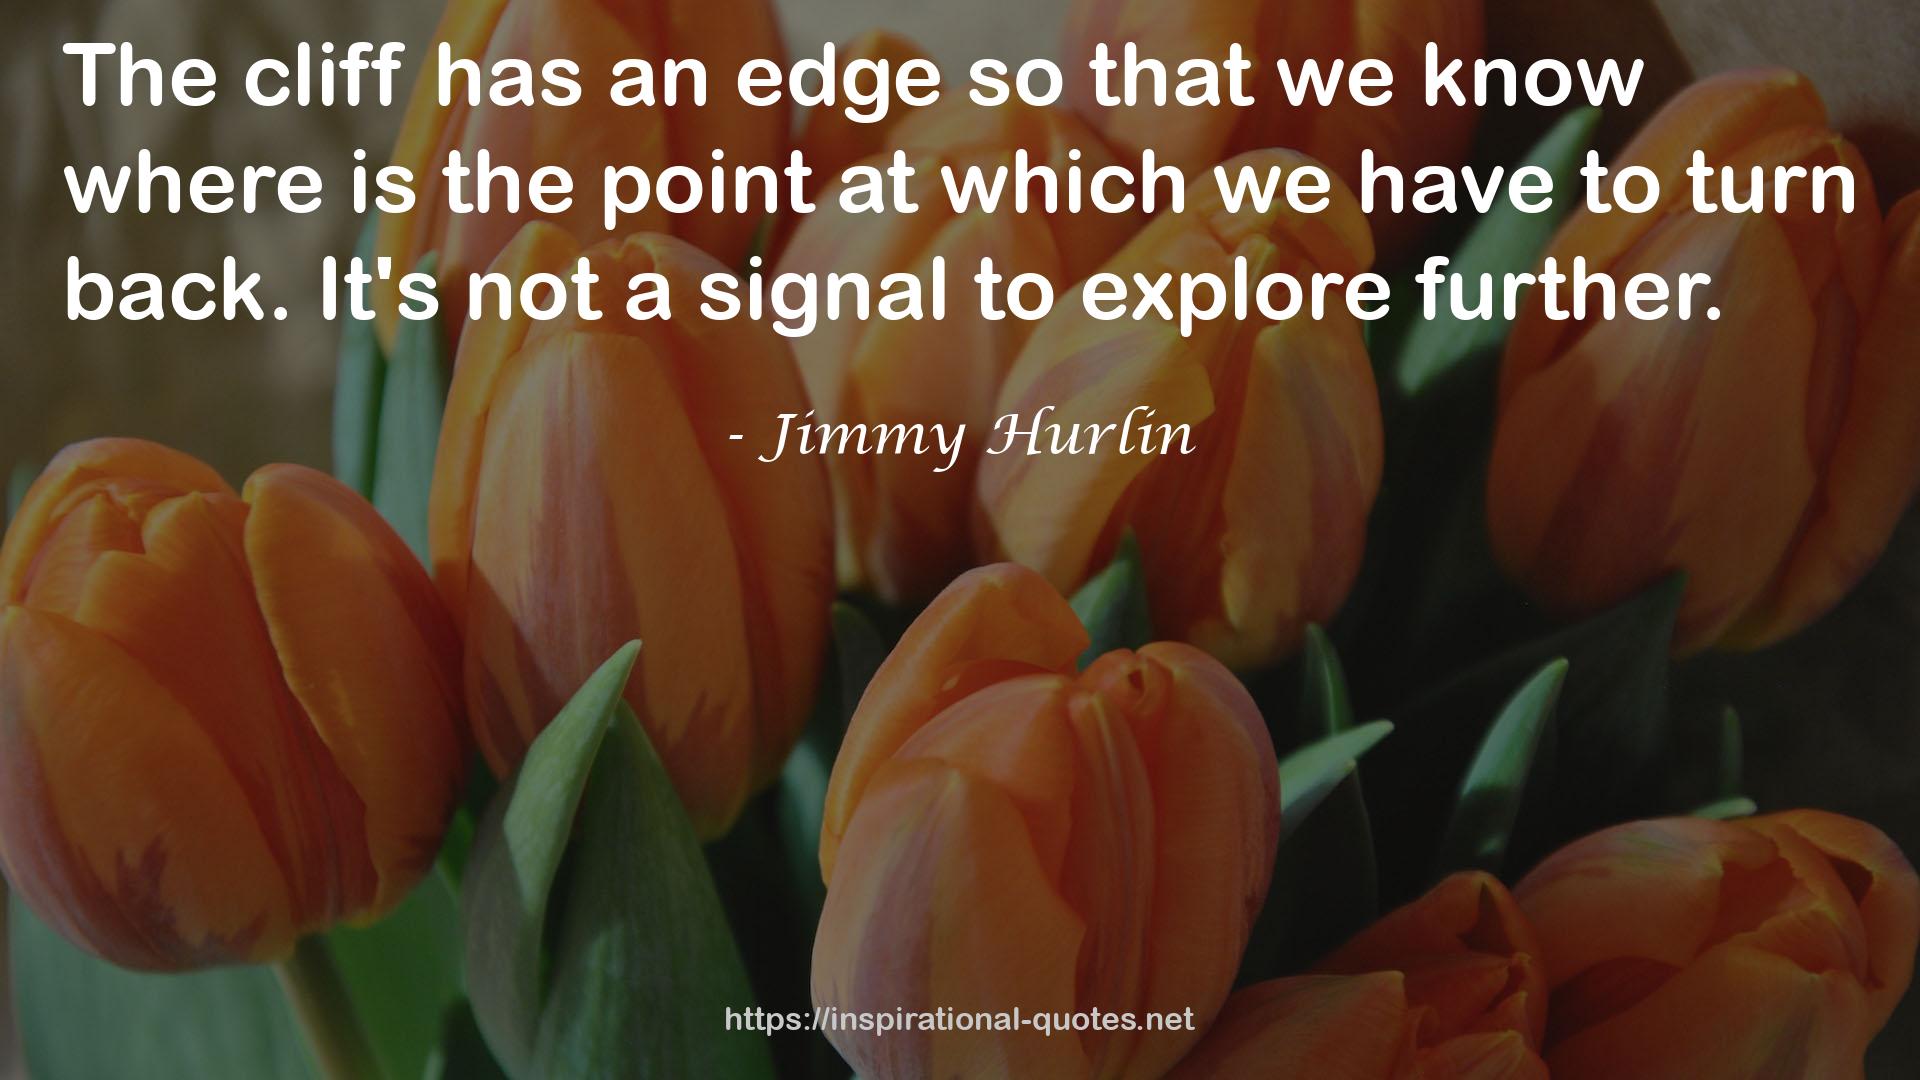 Jimmy Hurlin QUOTES